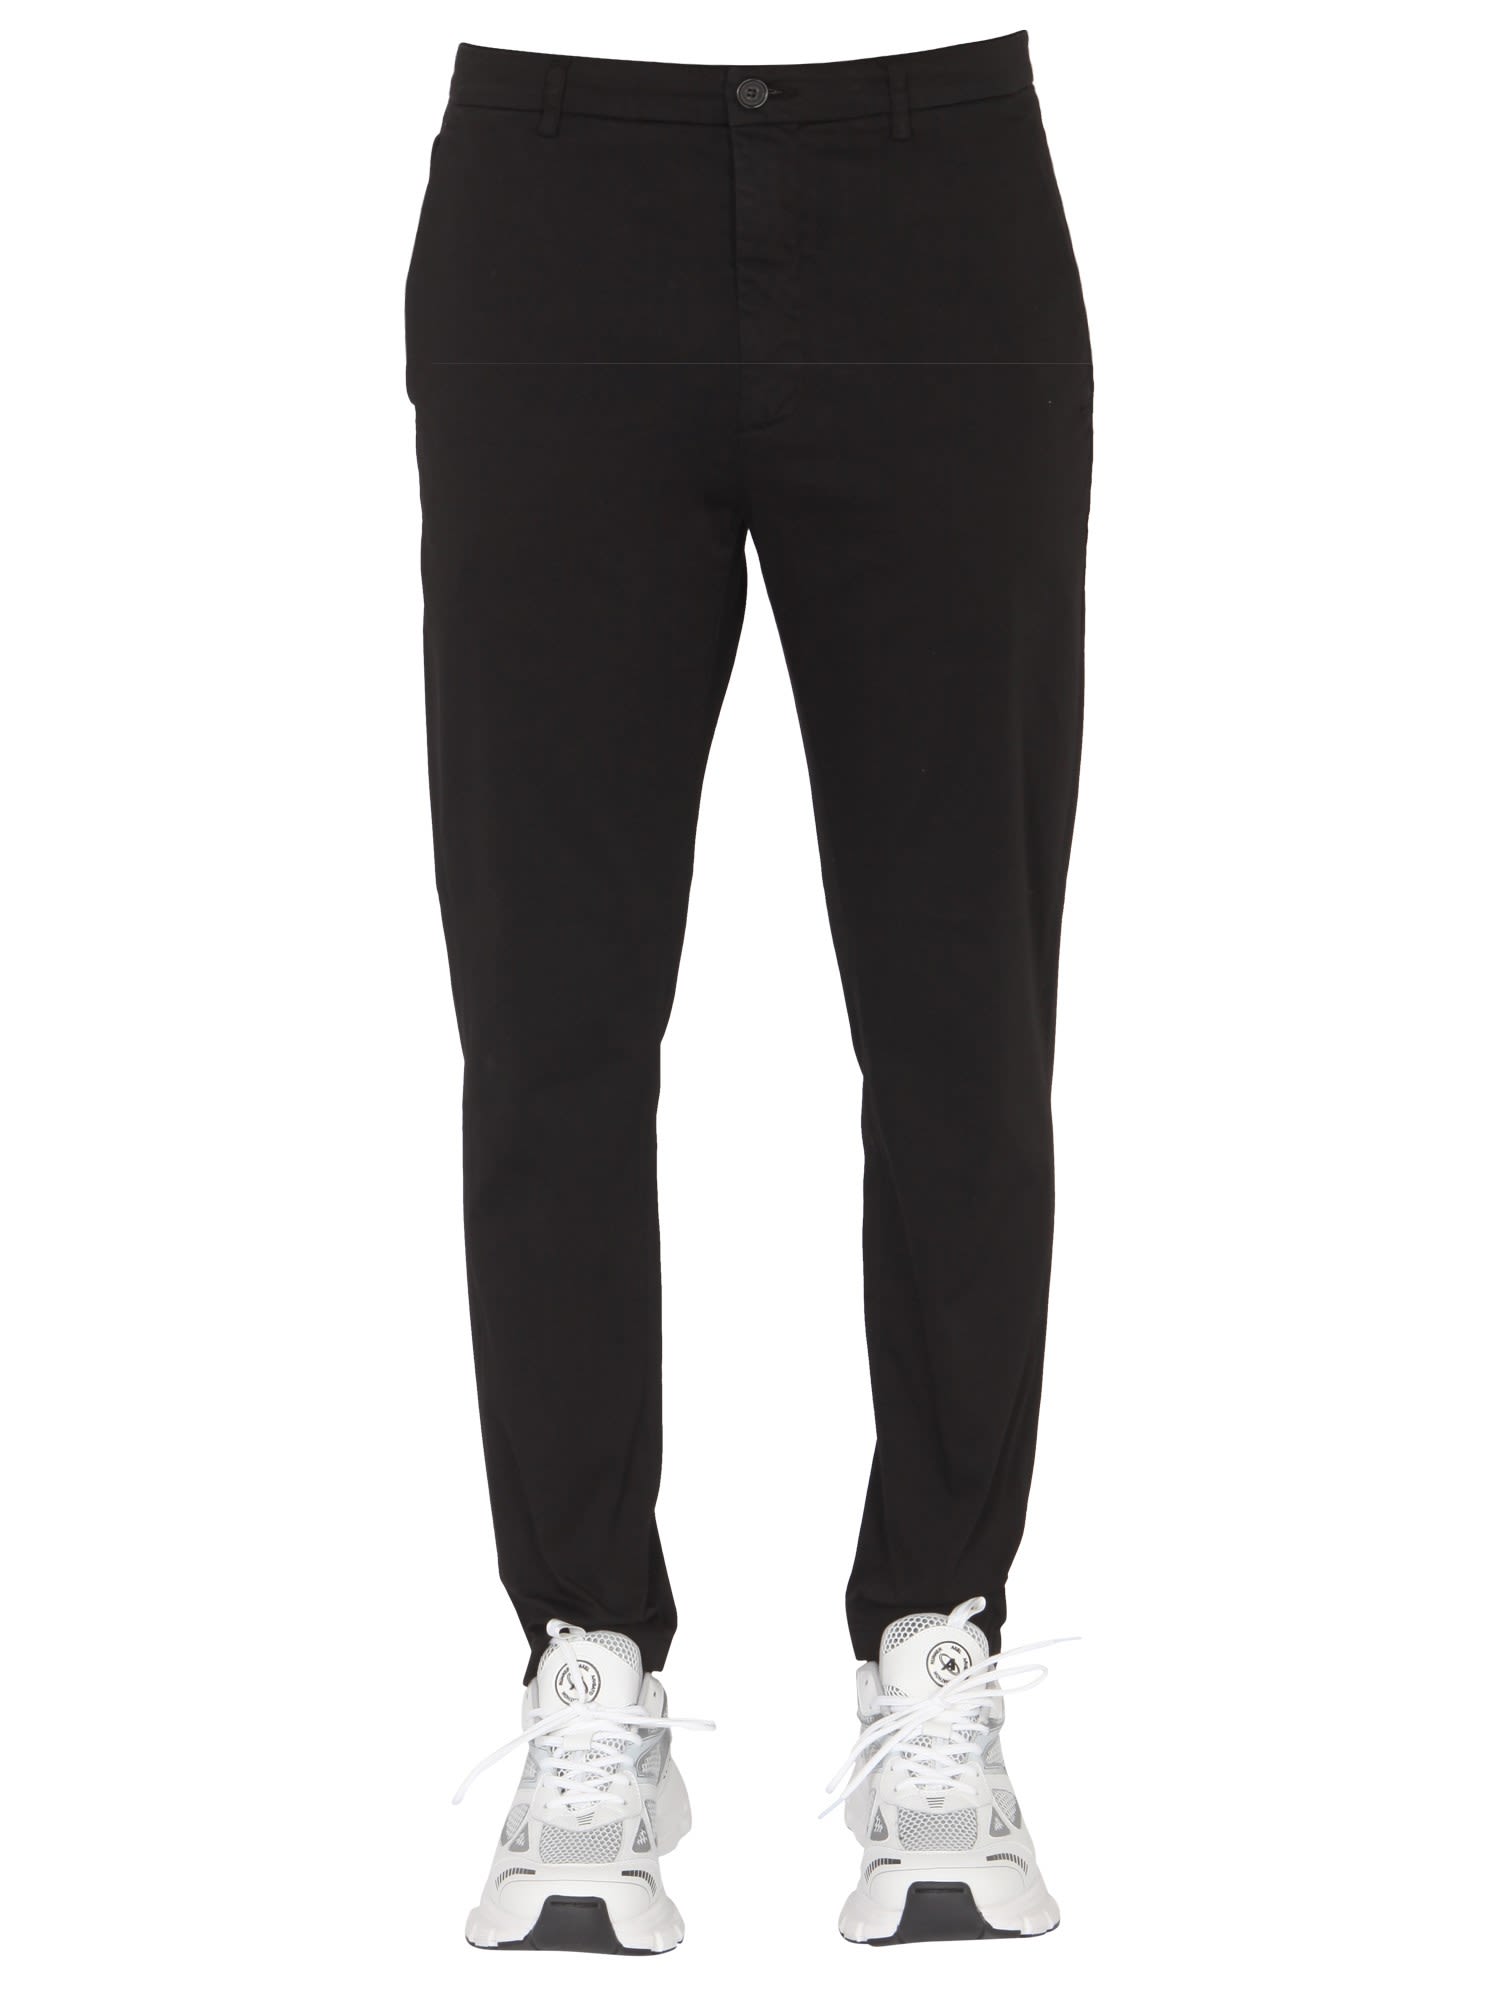 Department Five Prince Trousers